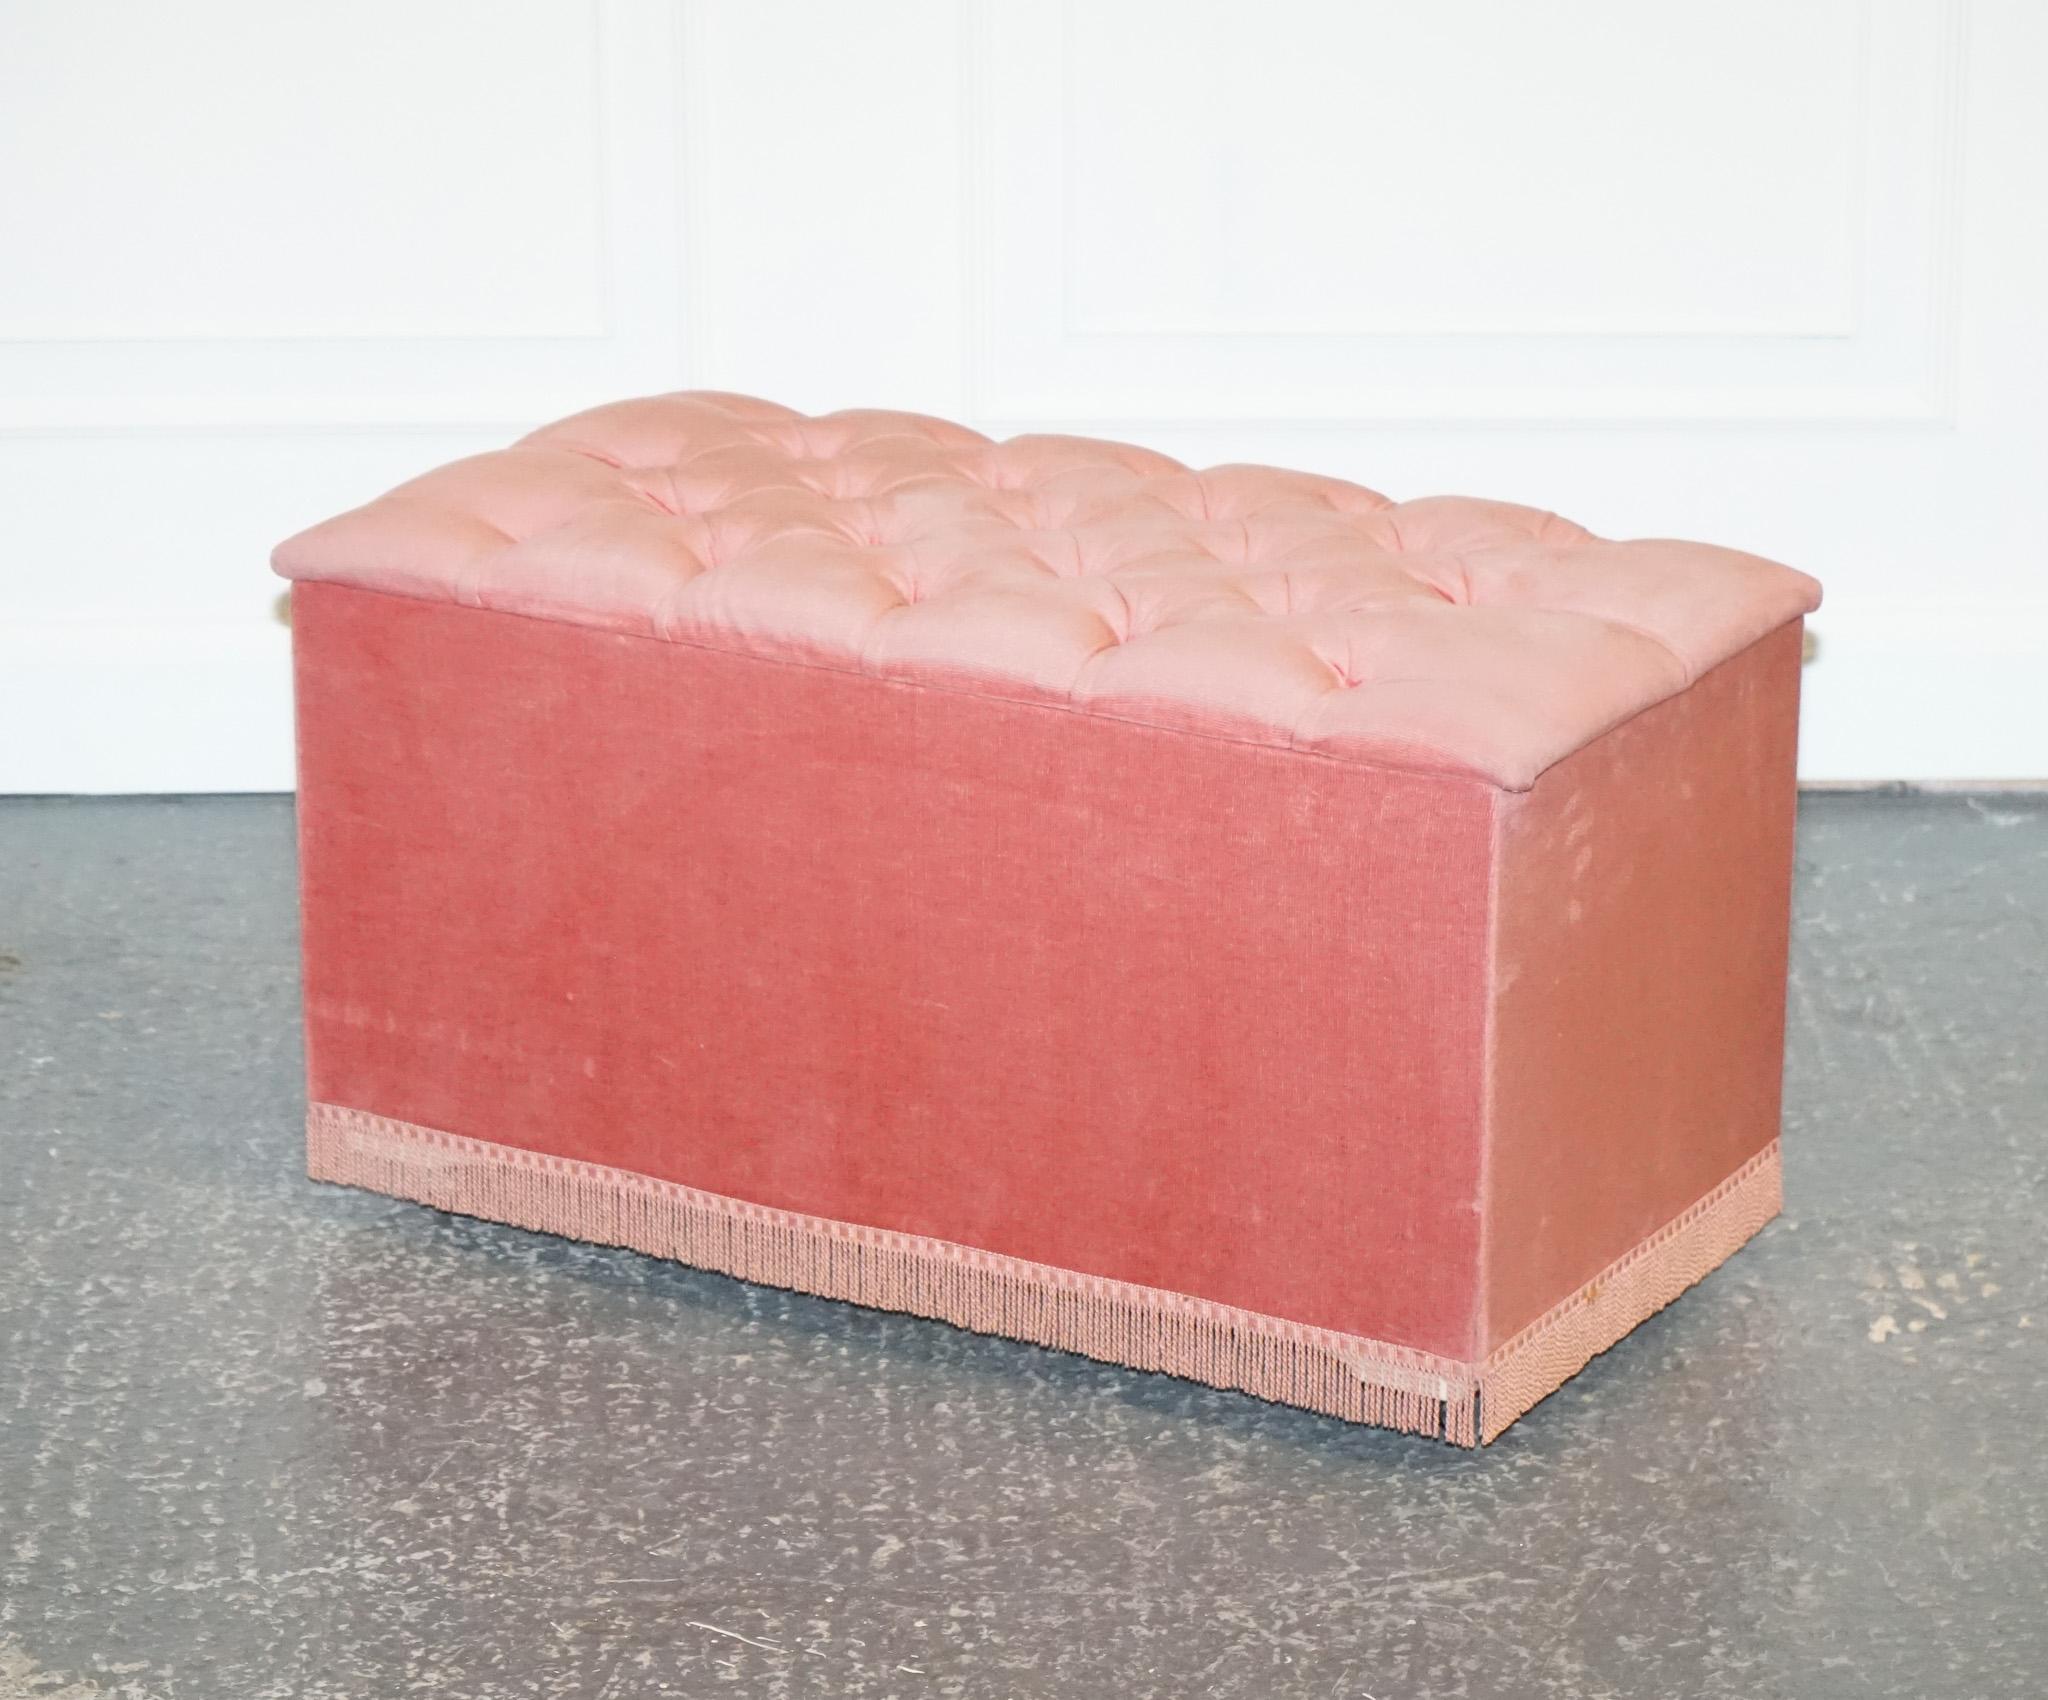 We are delighted to offer for sale this Lovely 1960s Tuffed Ottoman In A Soft Pink Velvet Fabric

The 1960s tufted ottoman in soft pink velvet fabric is an exquisite piece of furniture that exudes elegance and sophistication. The ottoman is